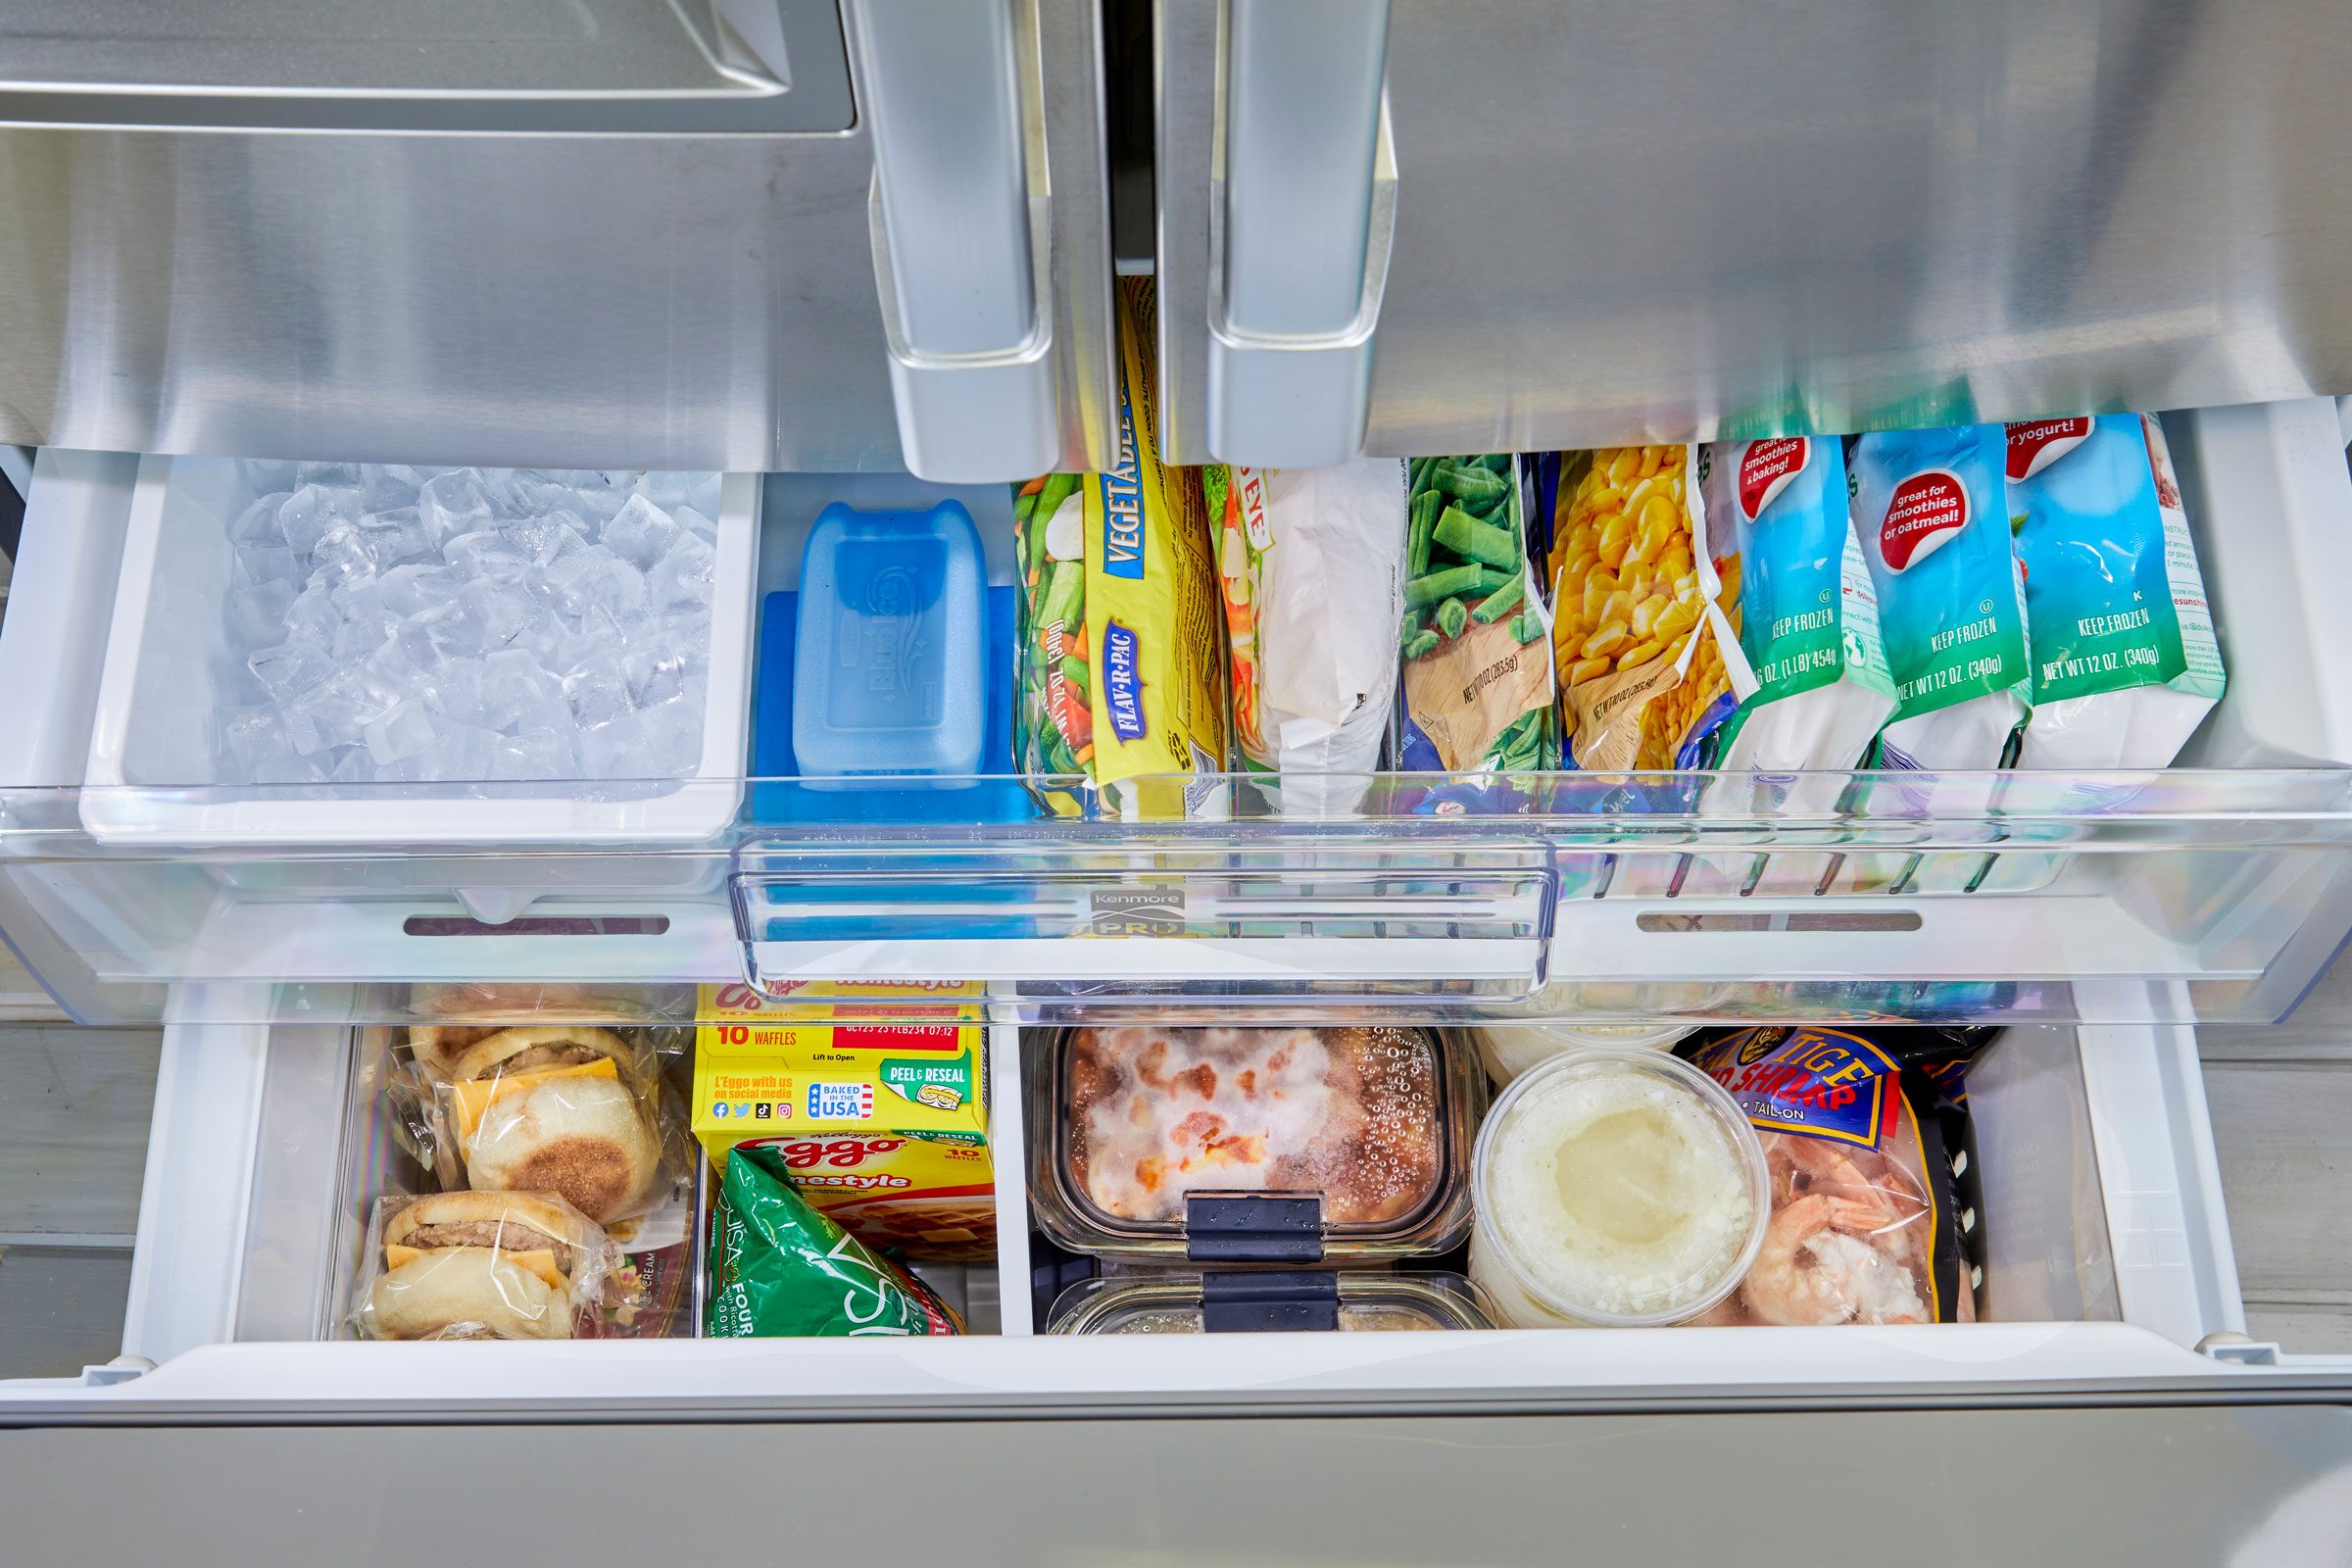 Now, Organise Your Refrigerator Like A Pro With These Containers